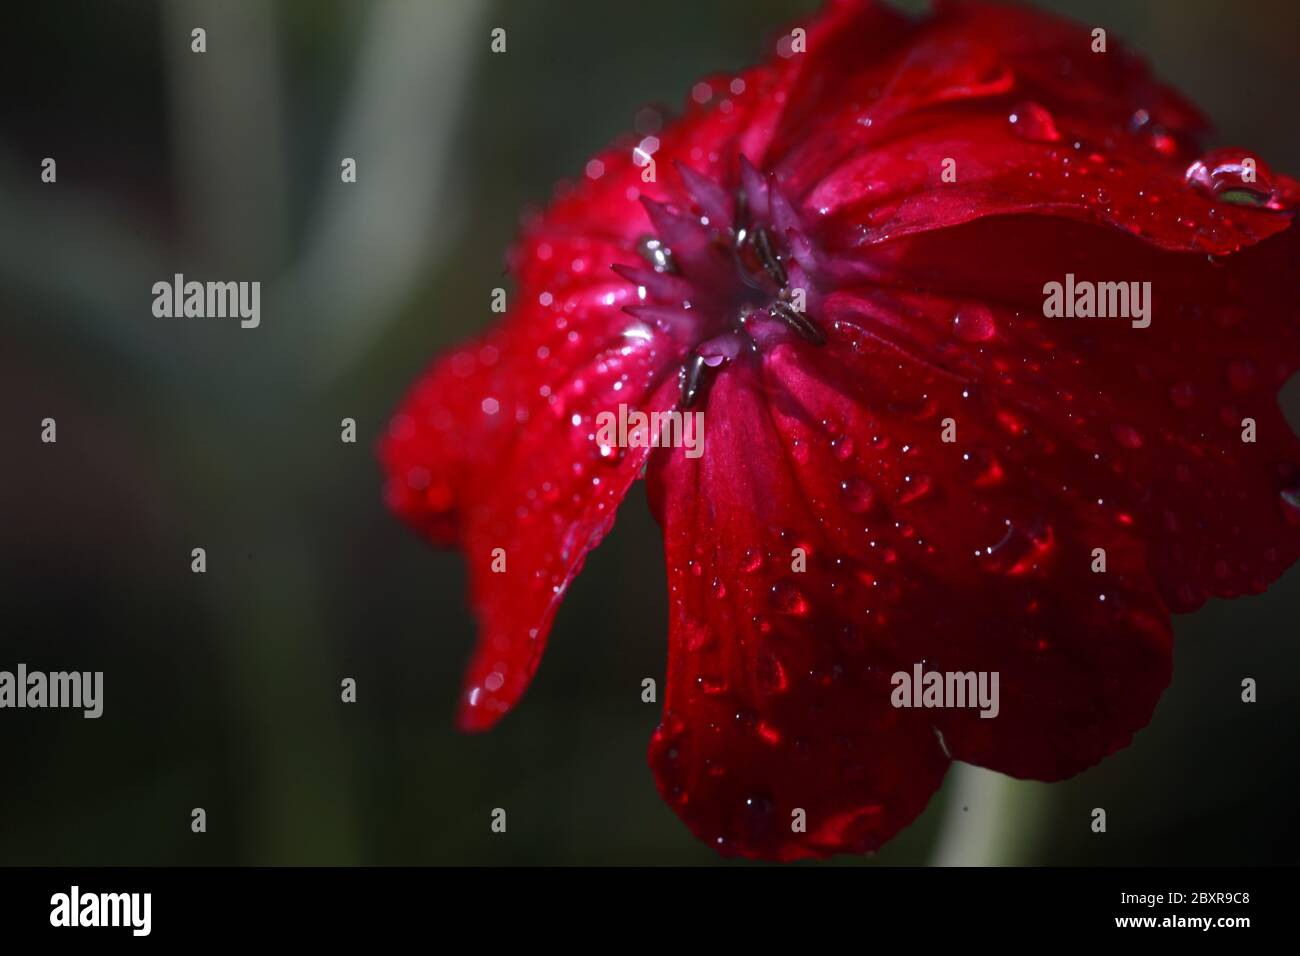 Close-up of a beautiful red flower with water drops on its petals, macro flower and blurred background. Stock Photo